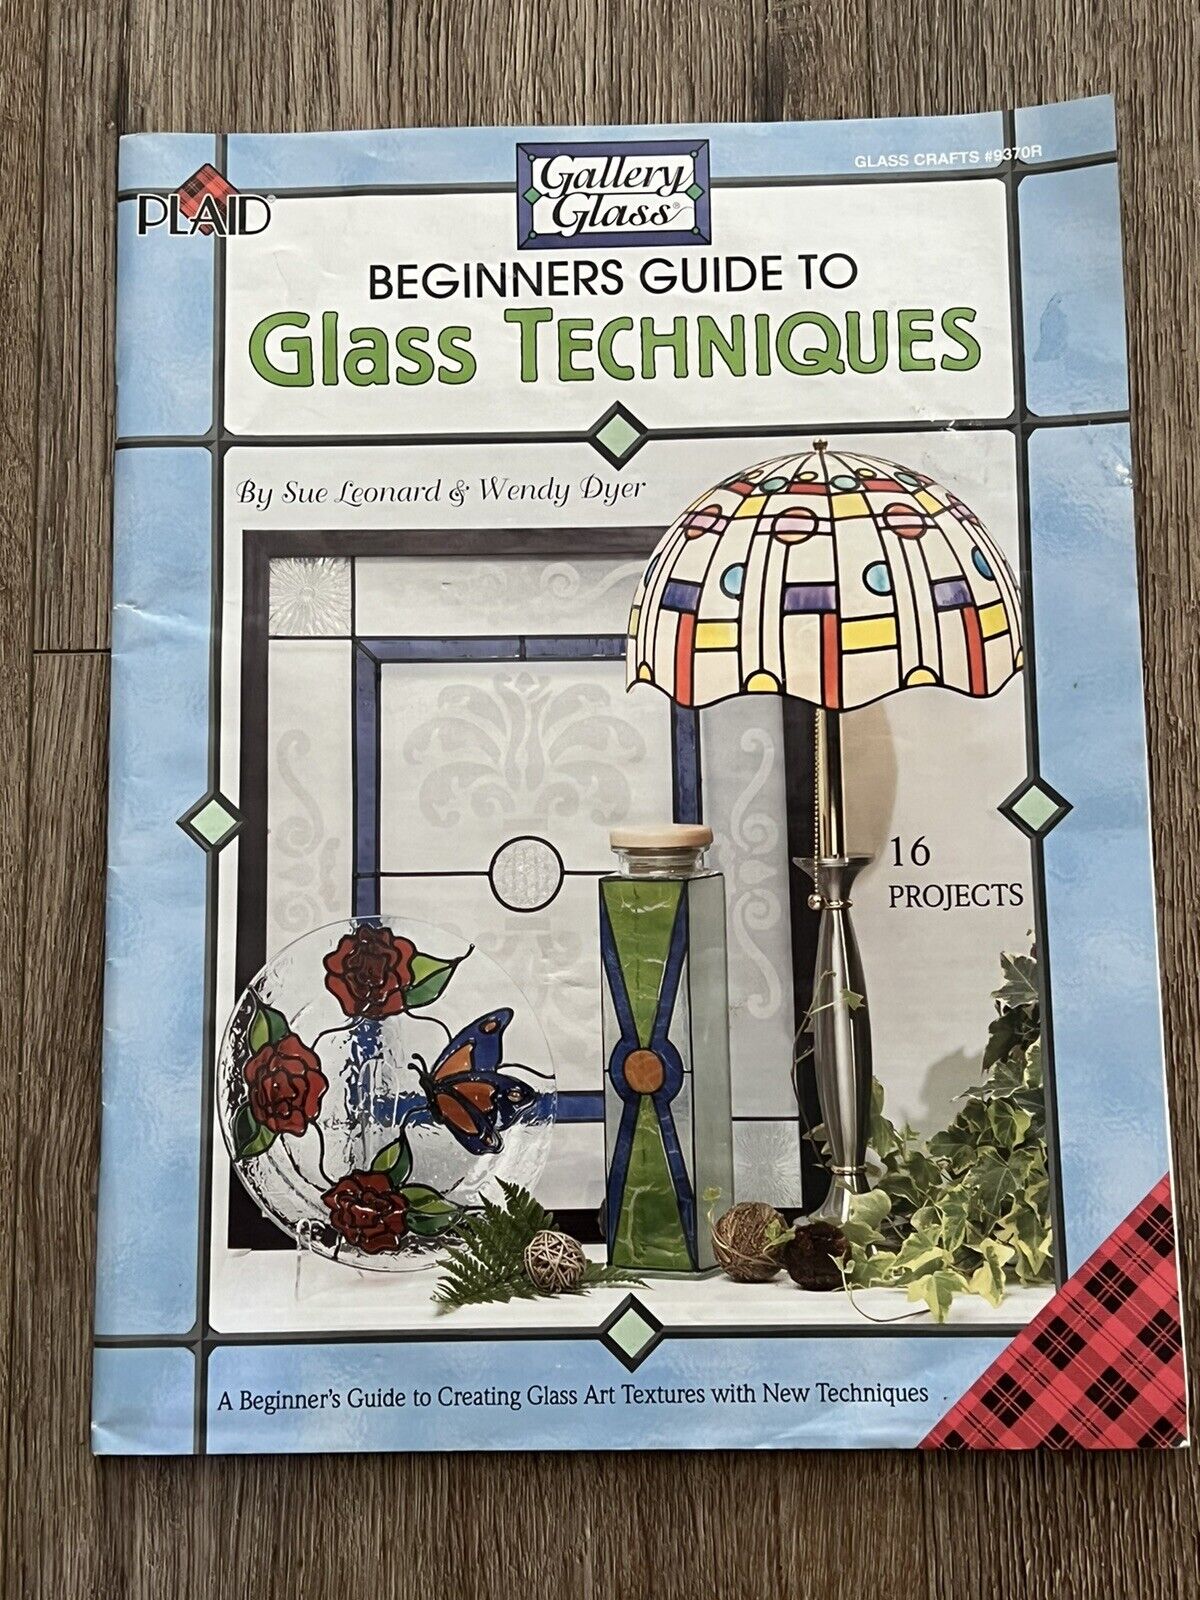 Plaid Gallery Glass Design Book W Patterns Beginners Guide To Glass Techniques